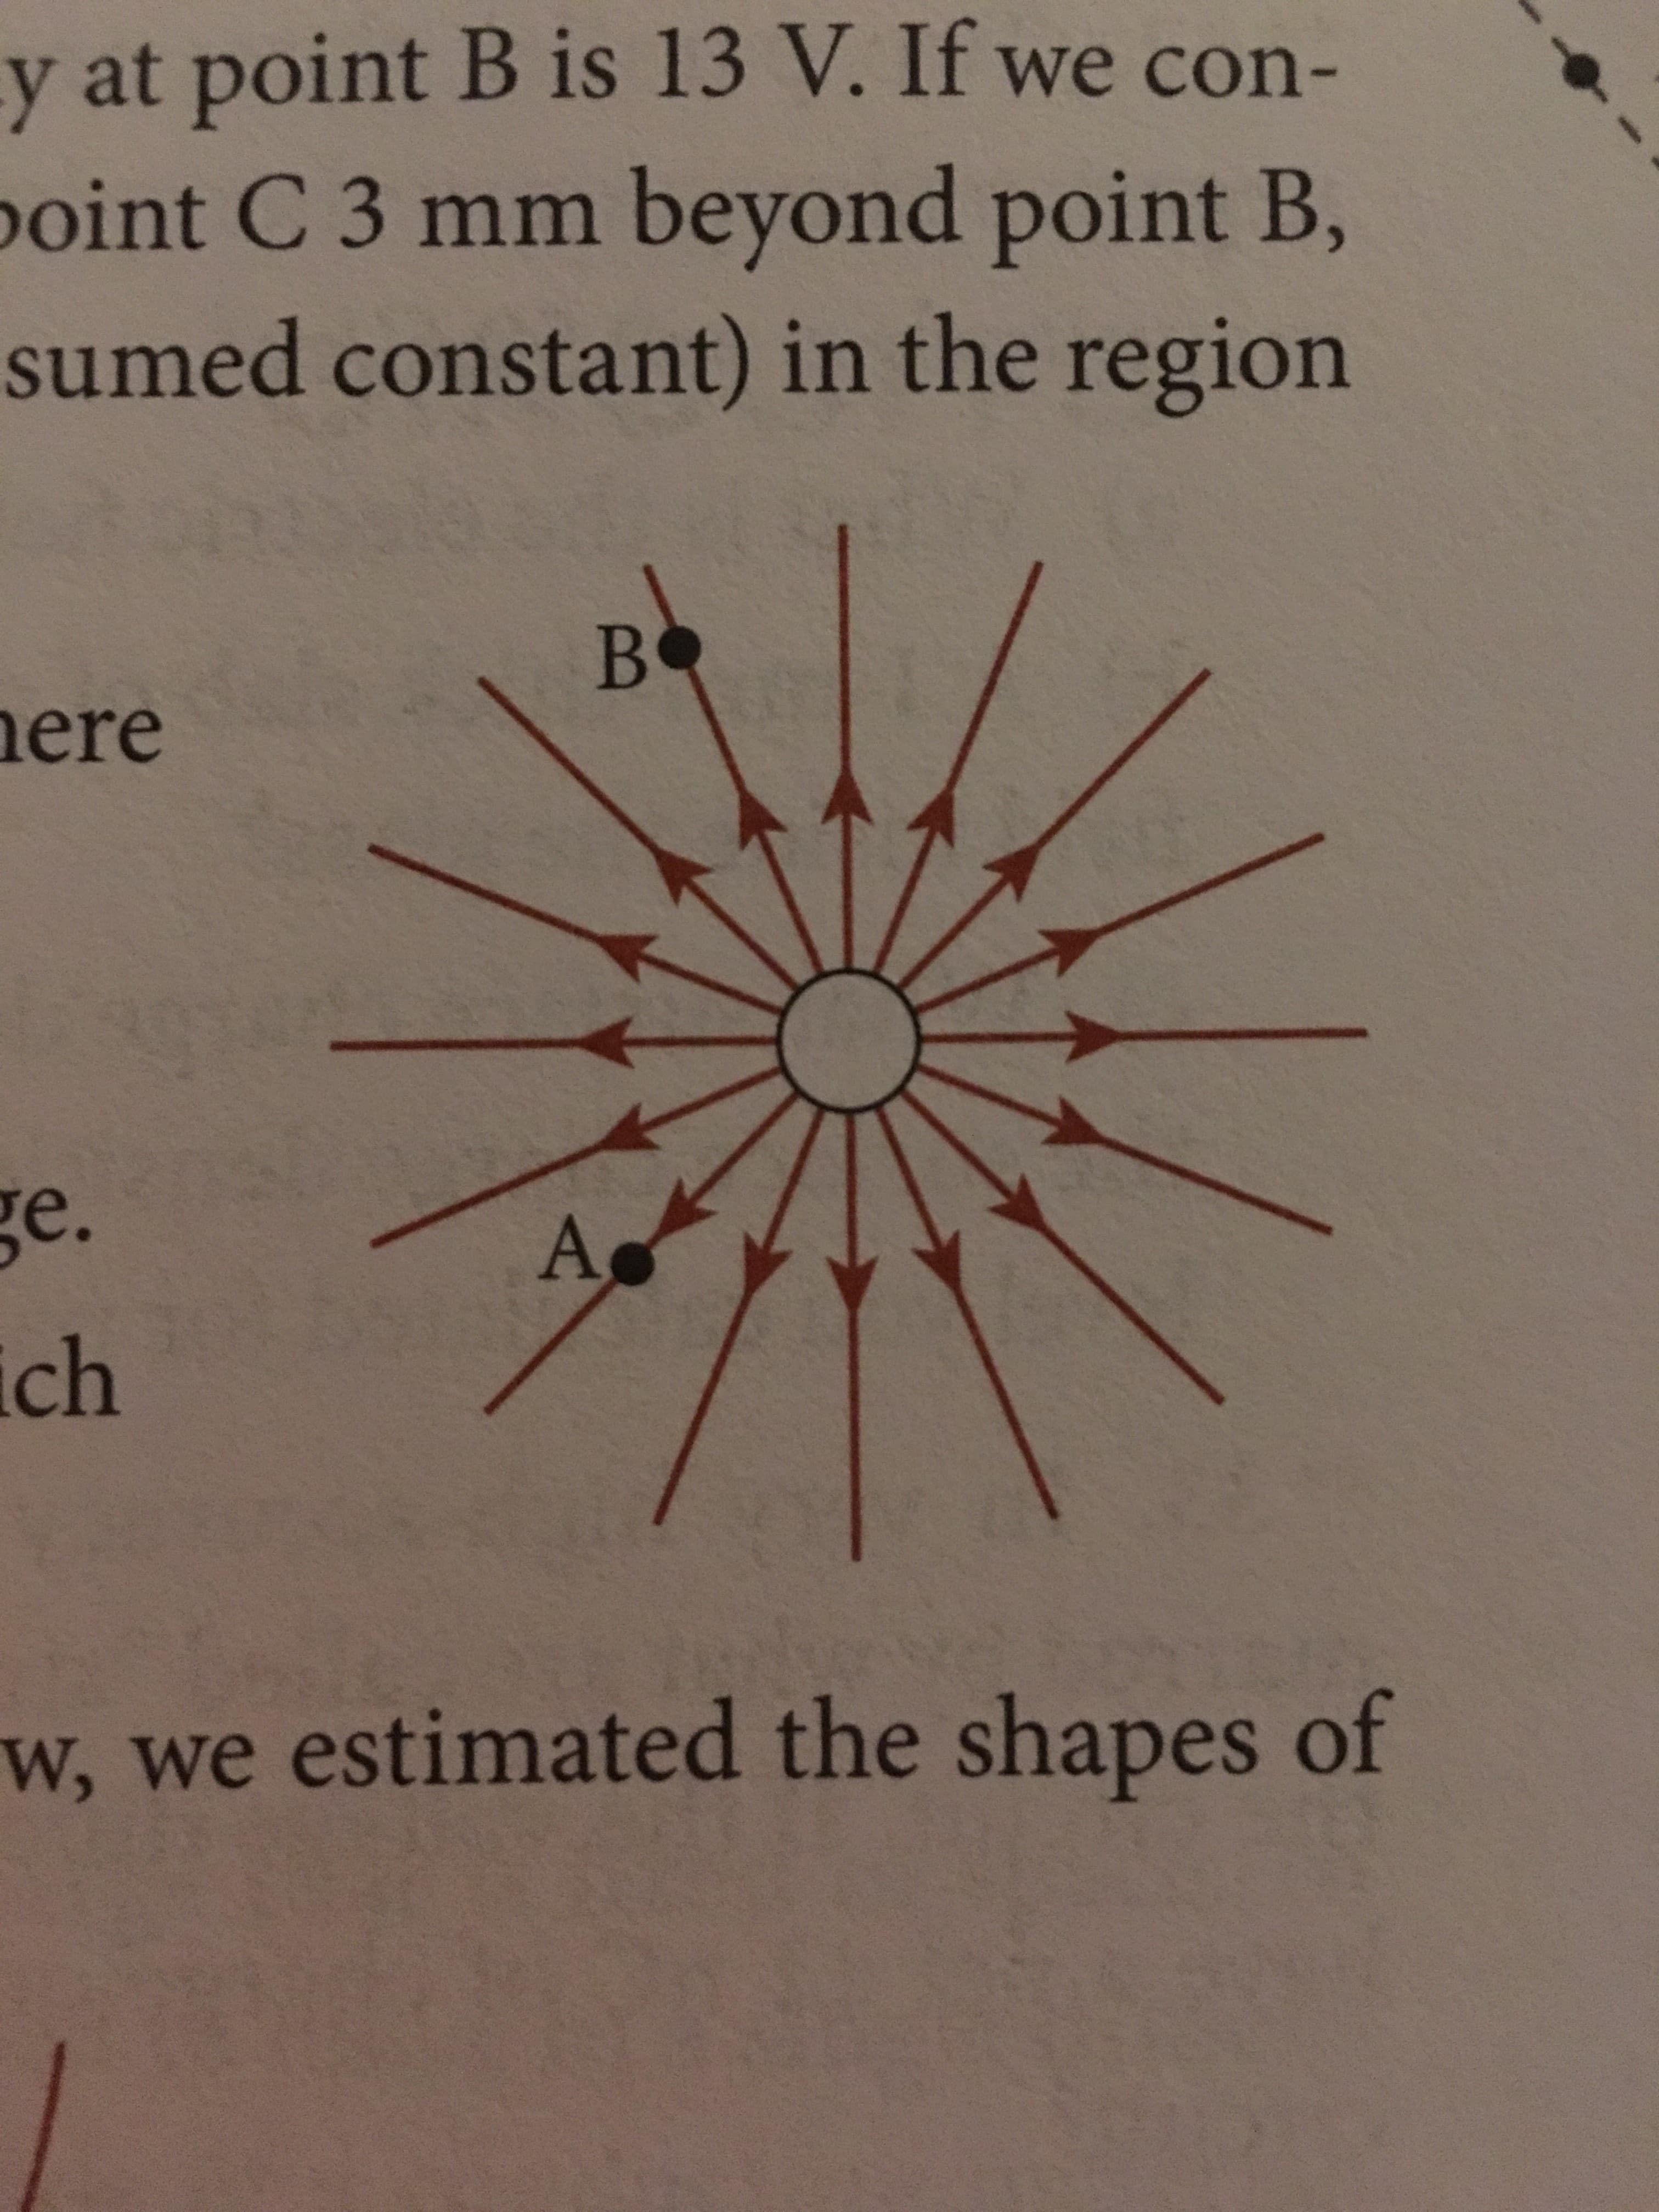 y at point B is 13 V. If we con-
point C 3 mm beyond point B,
sumed constant) in the region
ere
e.
ich
w, we estimated the shapes of
